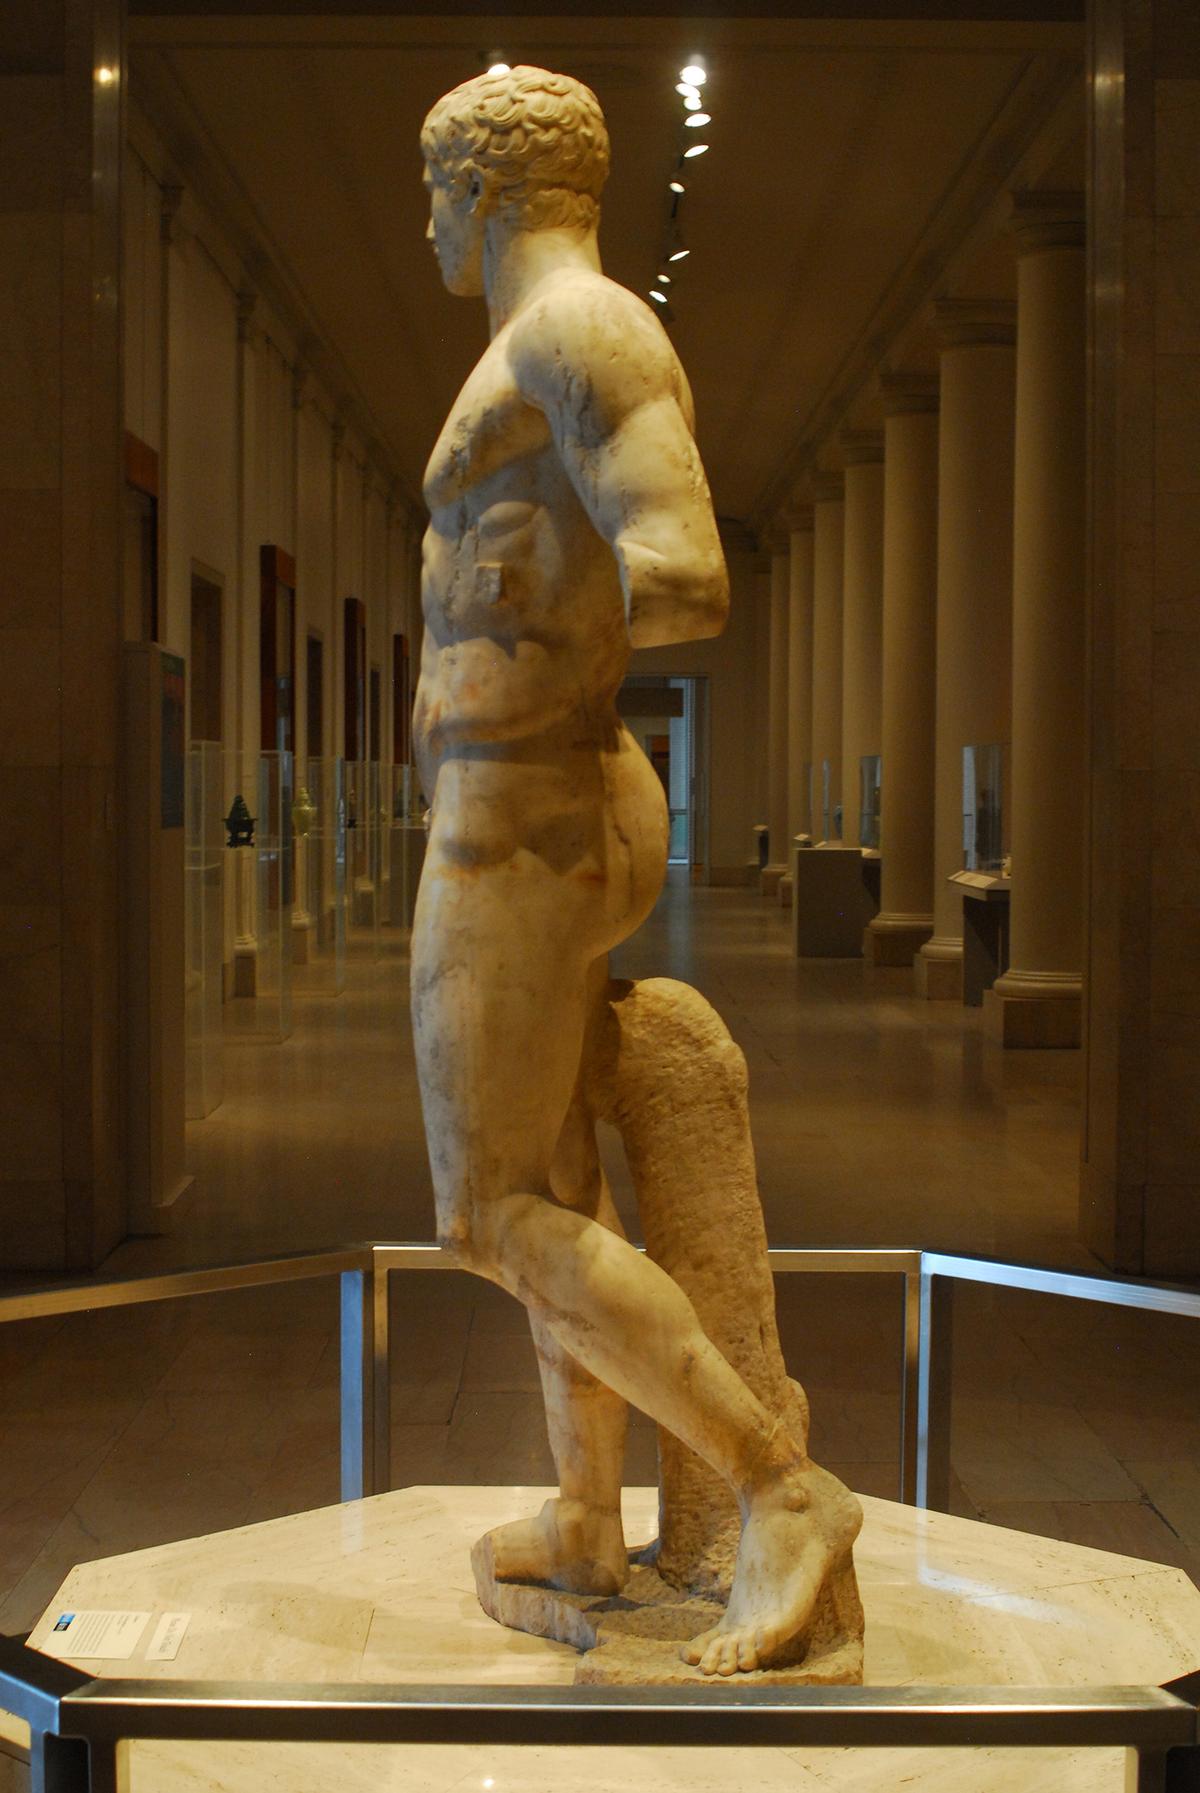 The S-shaped curvature known as contrapposto in the stance of "Spear-bearer." (<a href="https://www.flickr.com/photos/jerry7171/14011847043">Jerry</a>/<a href="https://creativecommons.org/licenses/by-sa/2.0/">CC BY-SA 2.0</a>)